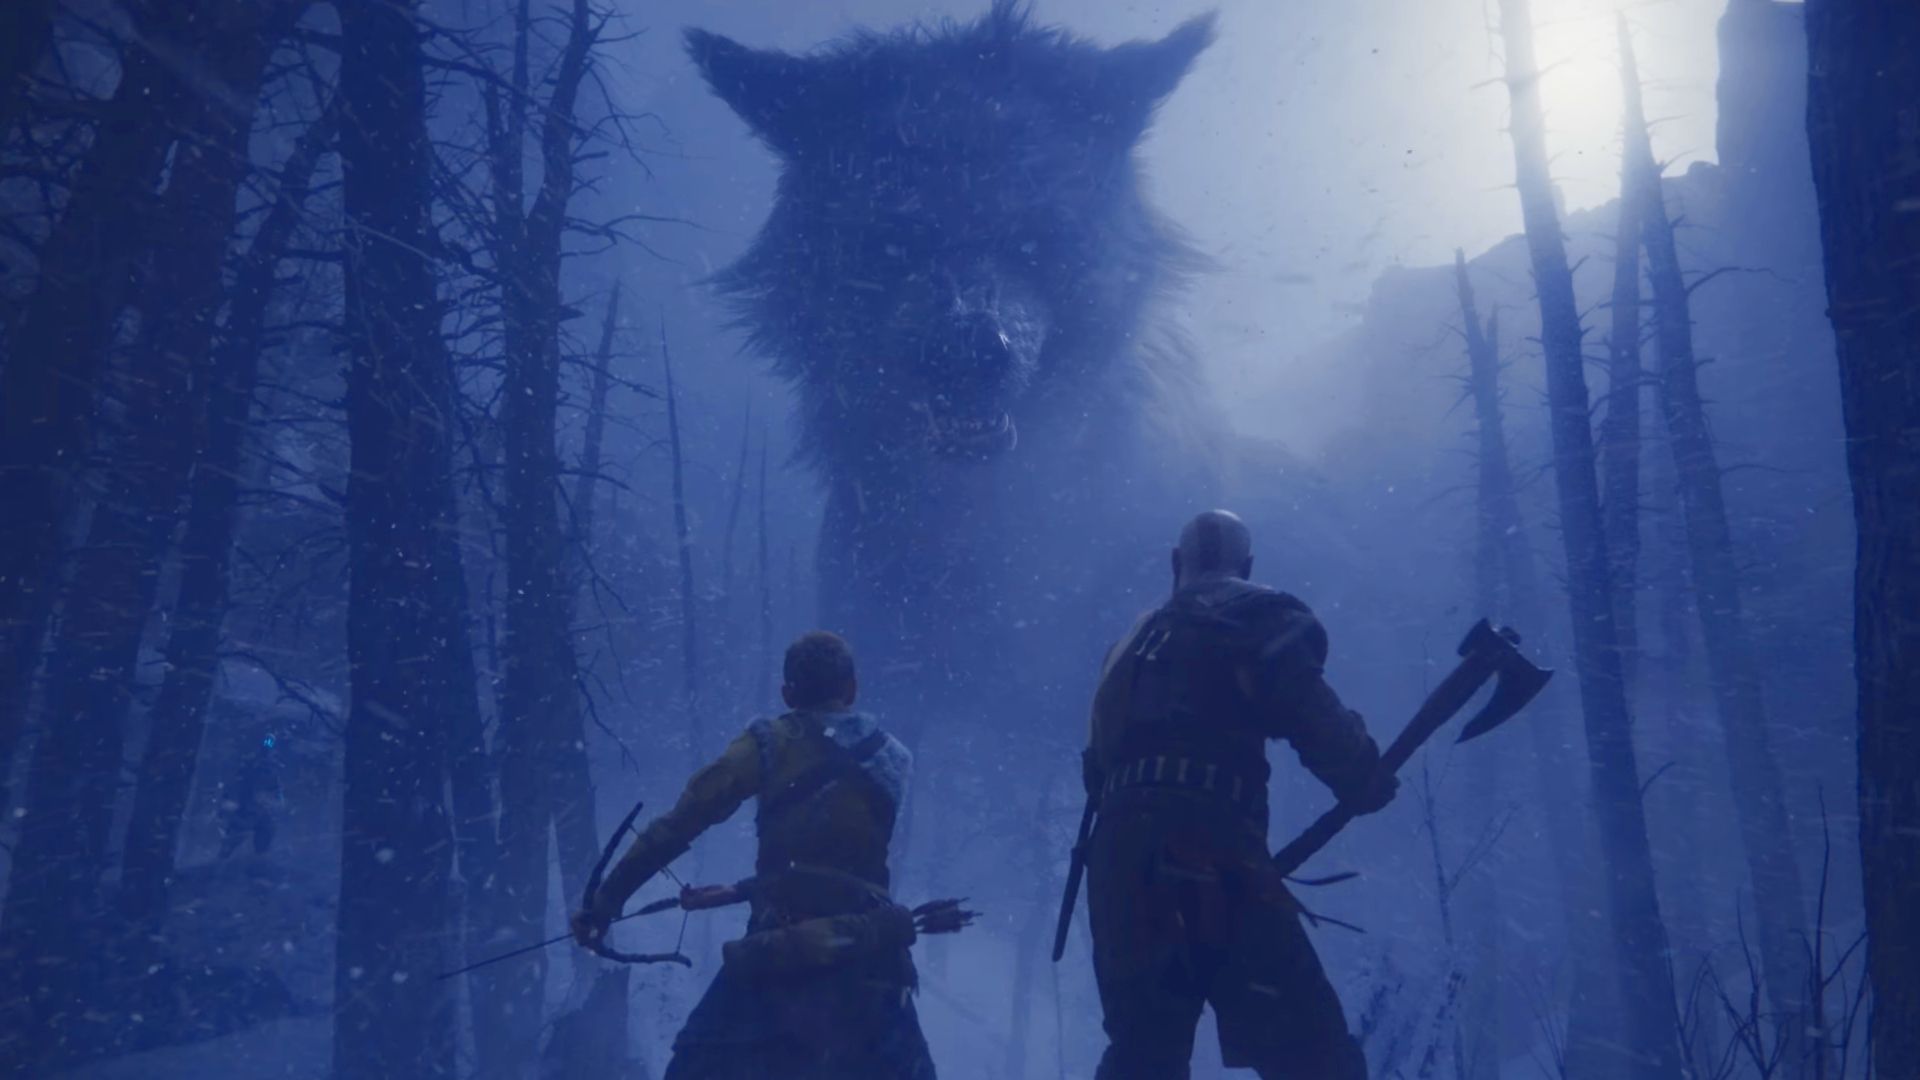 God of War Ragnarok's Kratos and his son Atreus are lost in a snowy forest when a giant wolf approaches them, weapons are drawn.